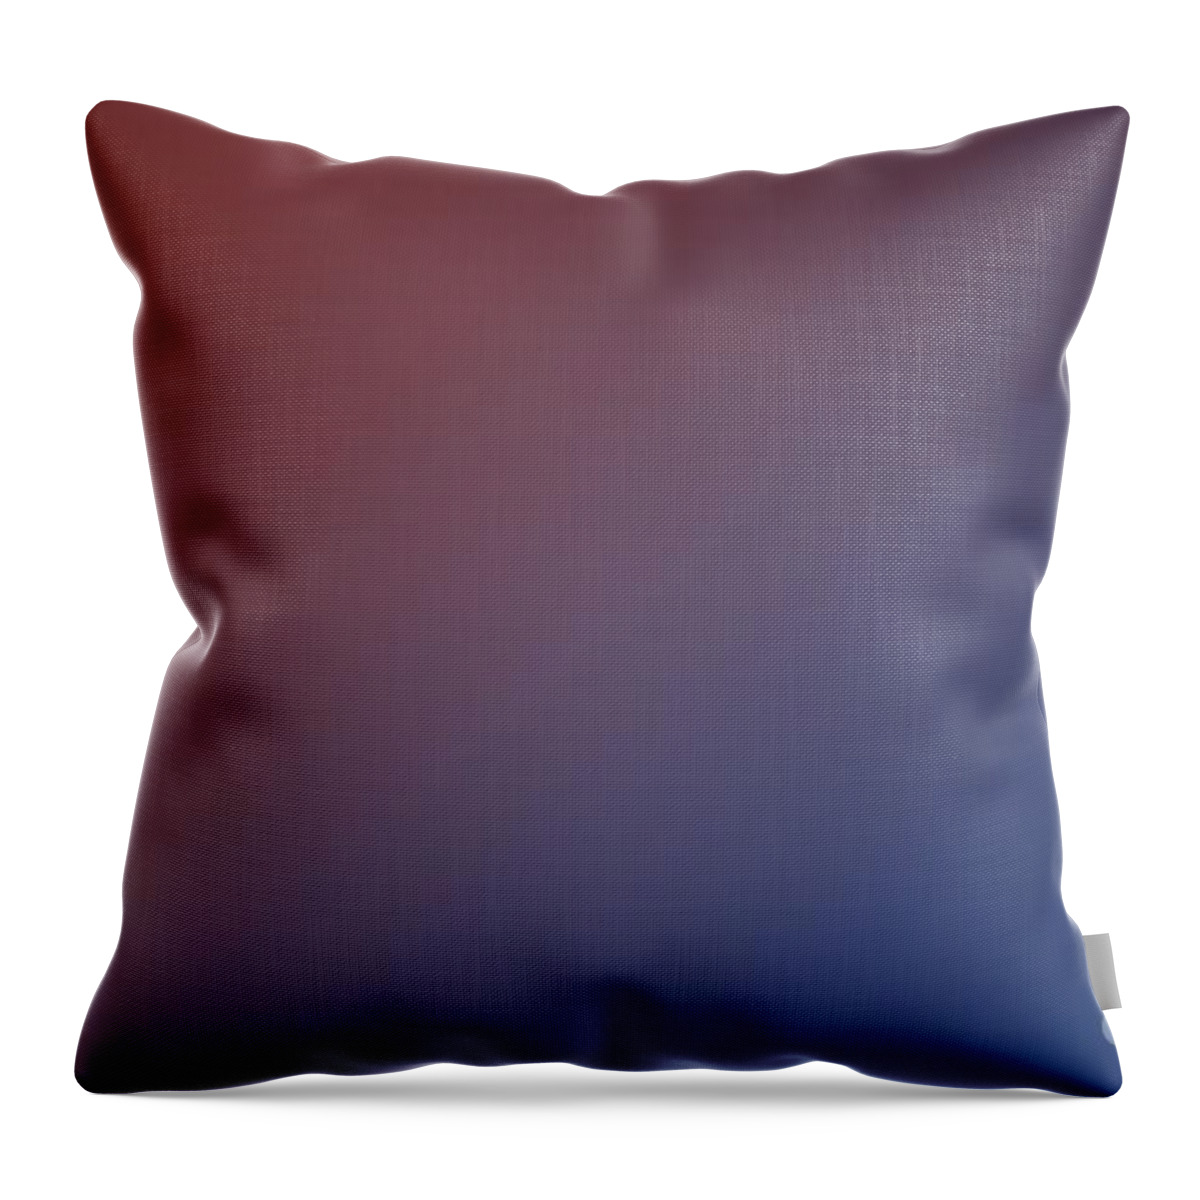 Blue Throw Pillow featuring the digital art Red and Blu by Archangelus Gallery